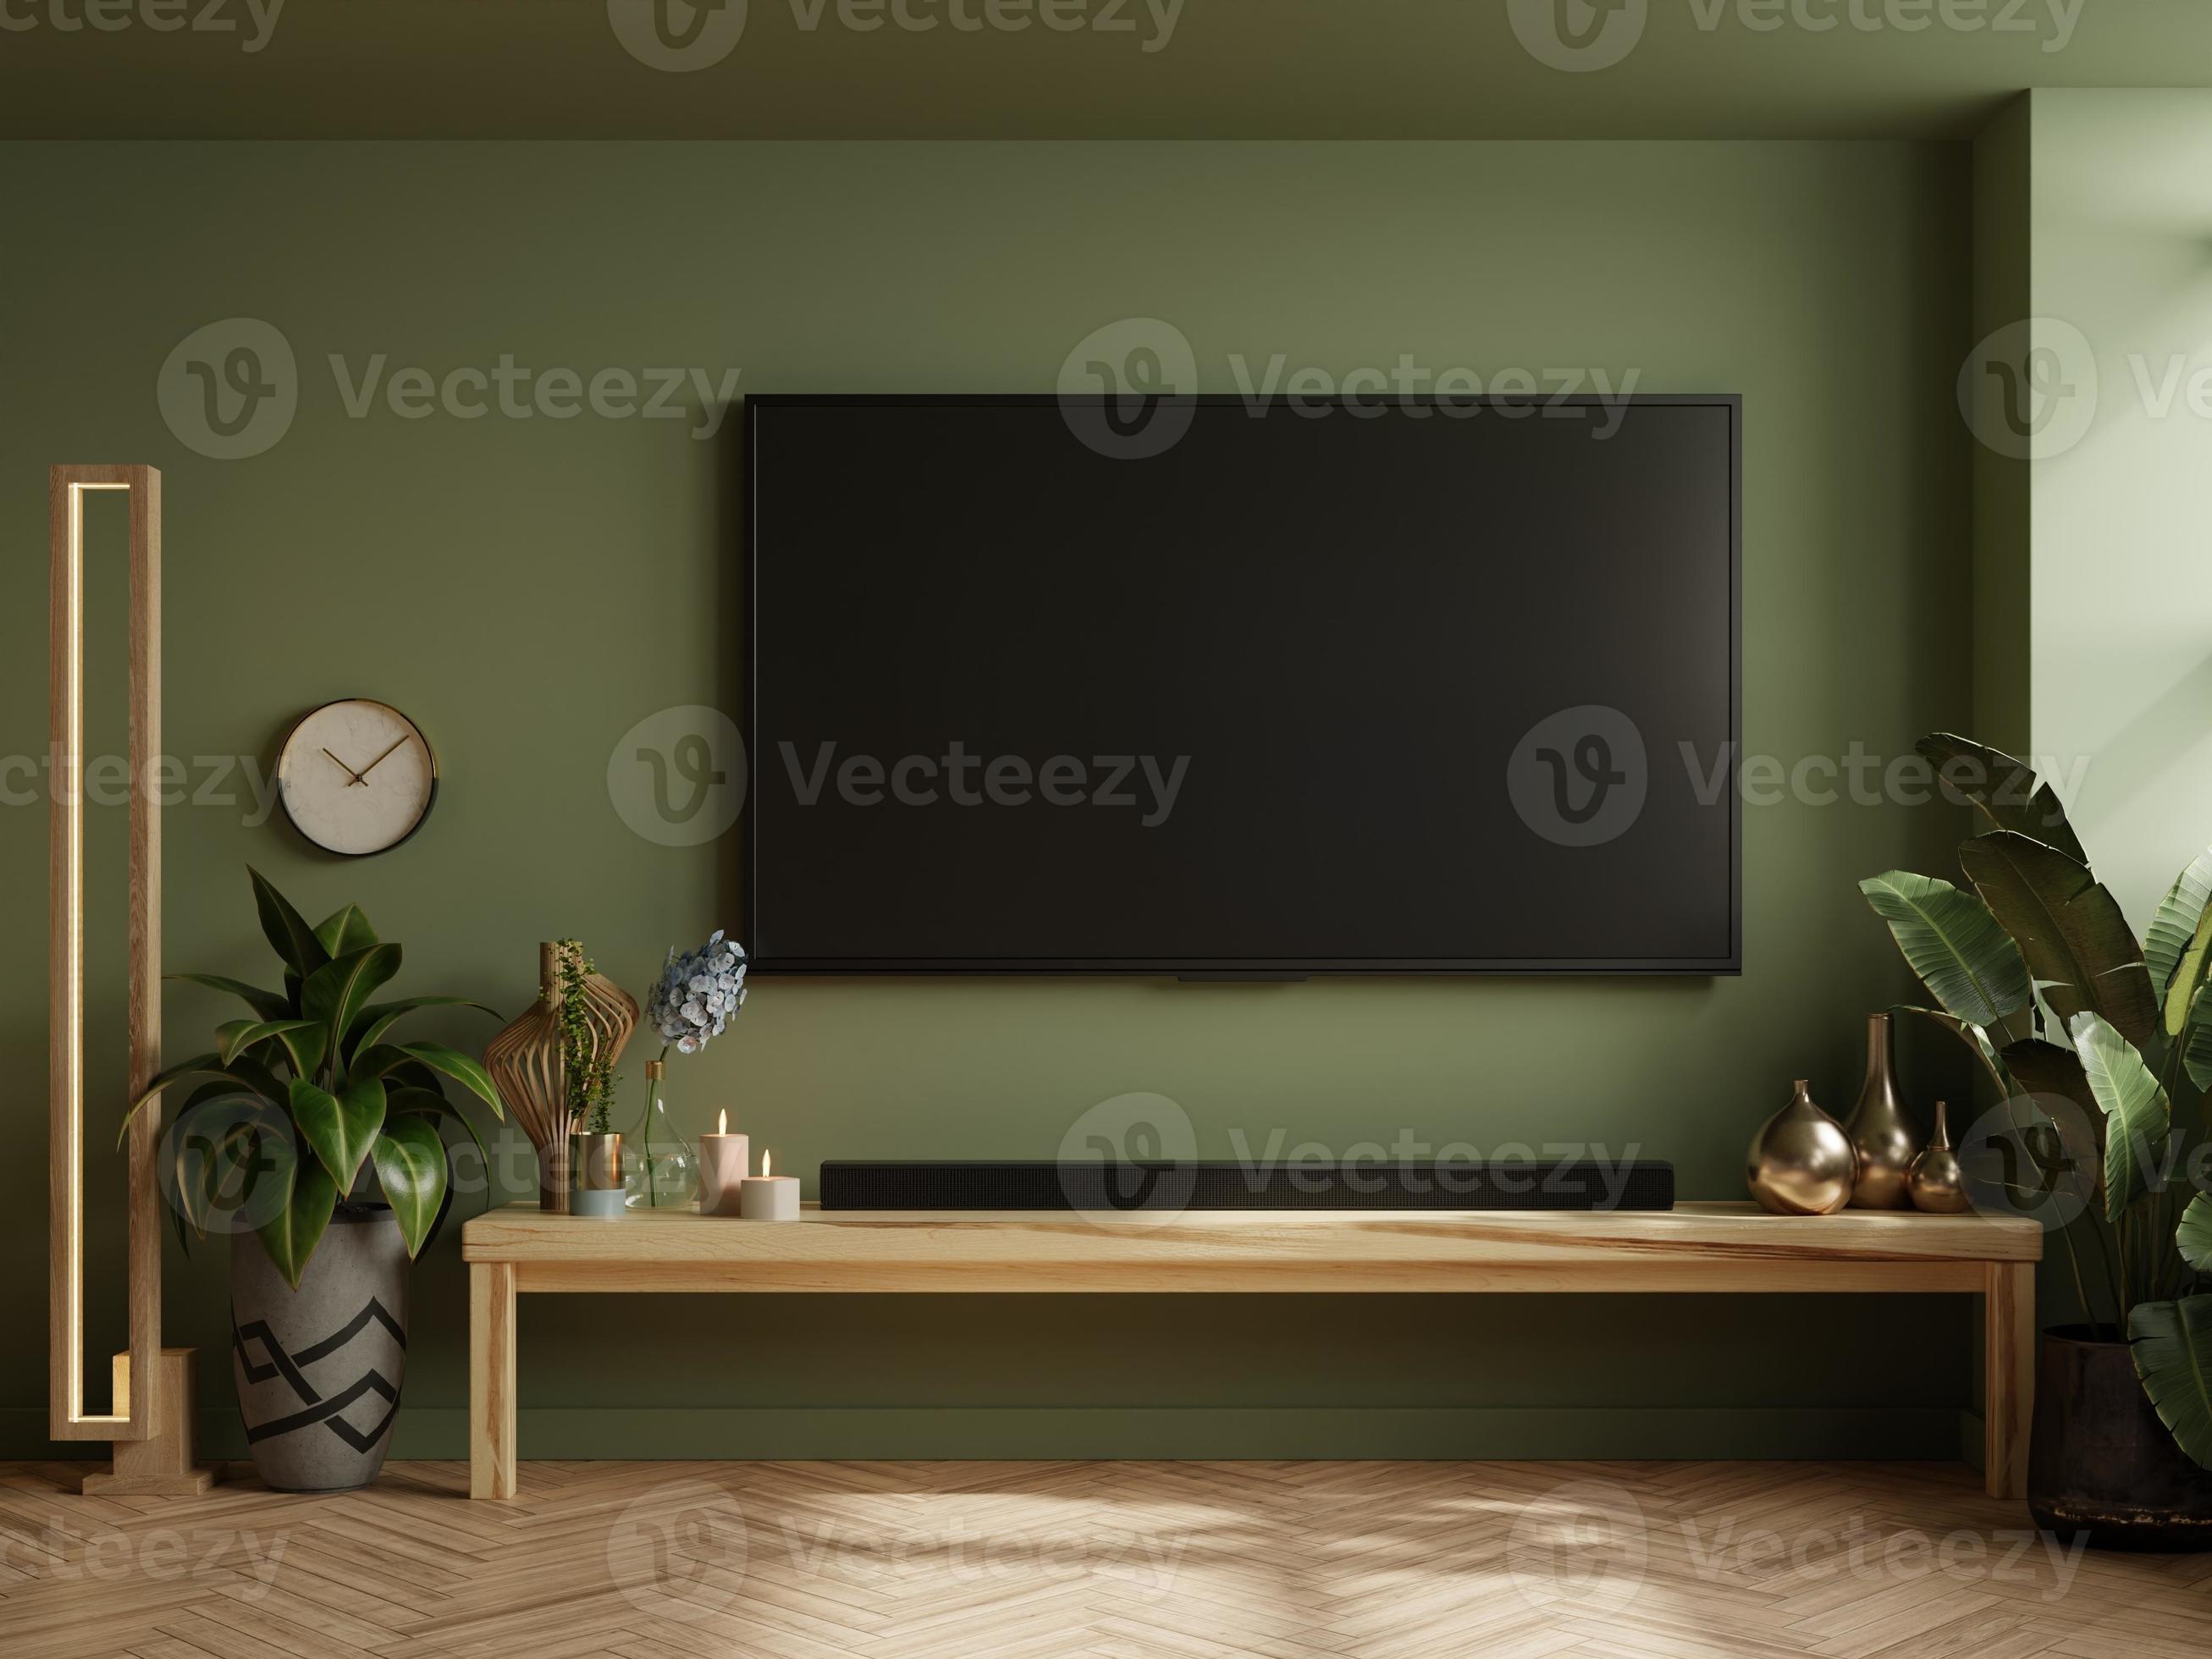 TV room in green wall background,Modern living room decor with a ...